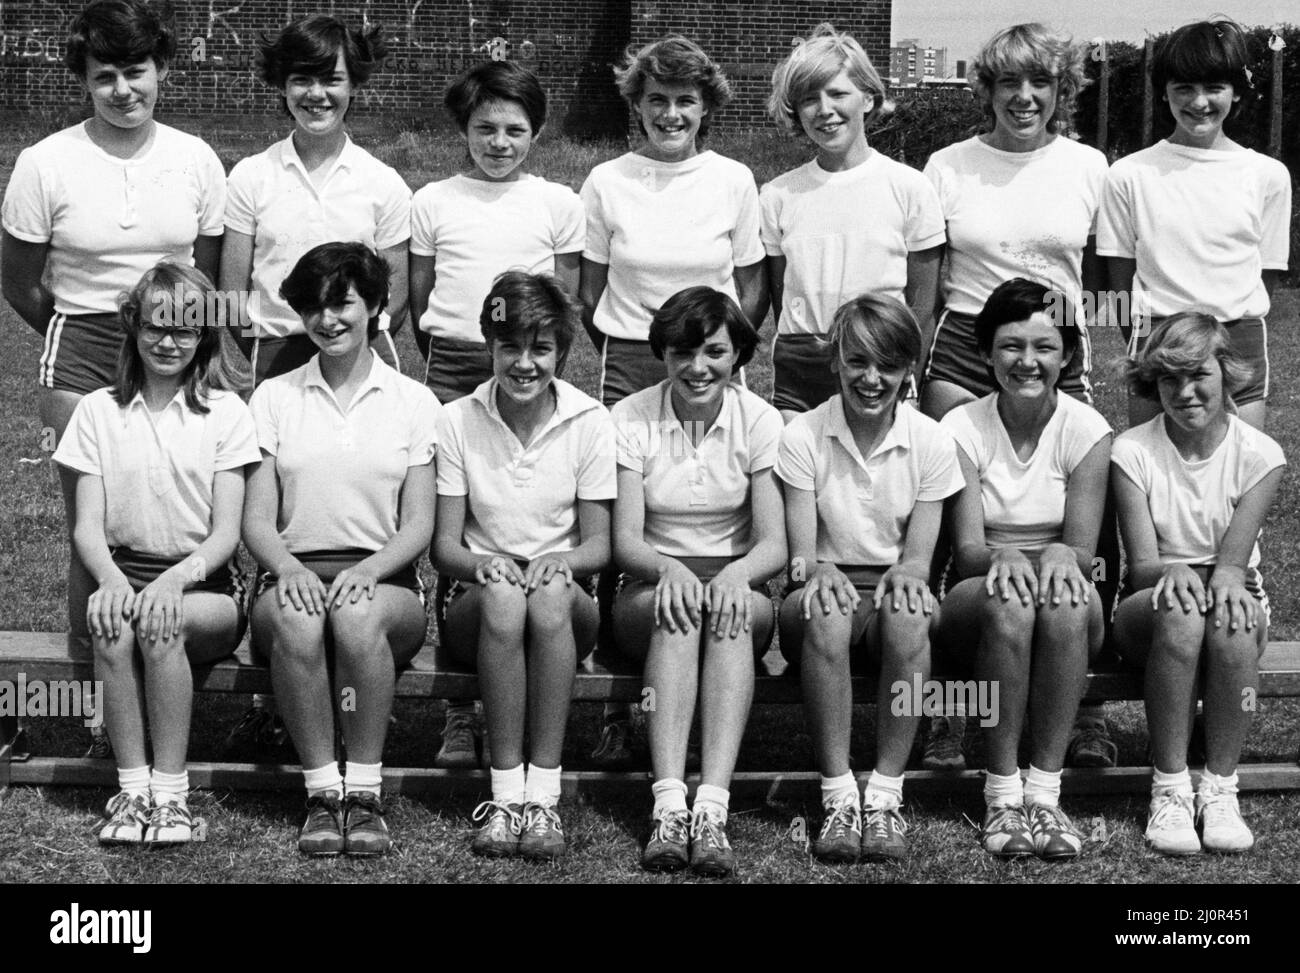 Gilbrook School, Eston, Redcar and Cleveland, North Yorkshire. 16th July 1984. Pictured, Under 13 Athletics Team, who have qualified for the Milk in Action Track and Field Schools Cup in Derby this weekend. Back Row (left to right) Tracy Tyerman, Julie Hayes, Hazel McLintock, Nichola Taylor, Jackie Strangeways, Nichola Henderson, Kathryn Warnock. Front Row (left to right) Tracy Morton, Joanne Mitchell, Joanne Adams, Sarah Freer, Pamela Mealing, Carol Speirs, Tanya Beaford. Stock Photo